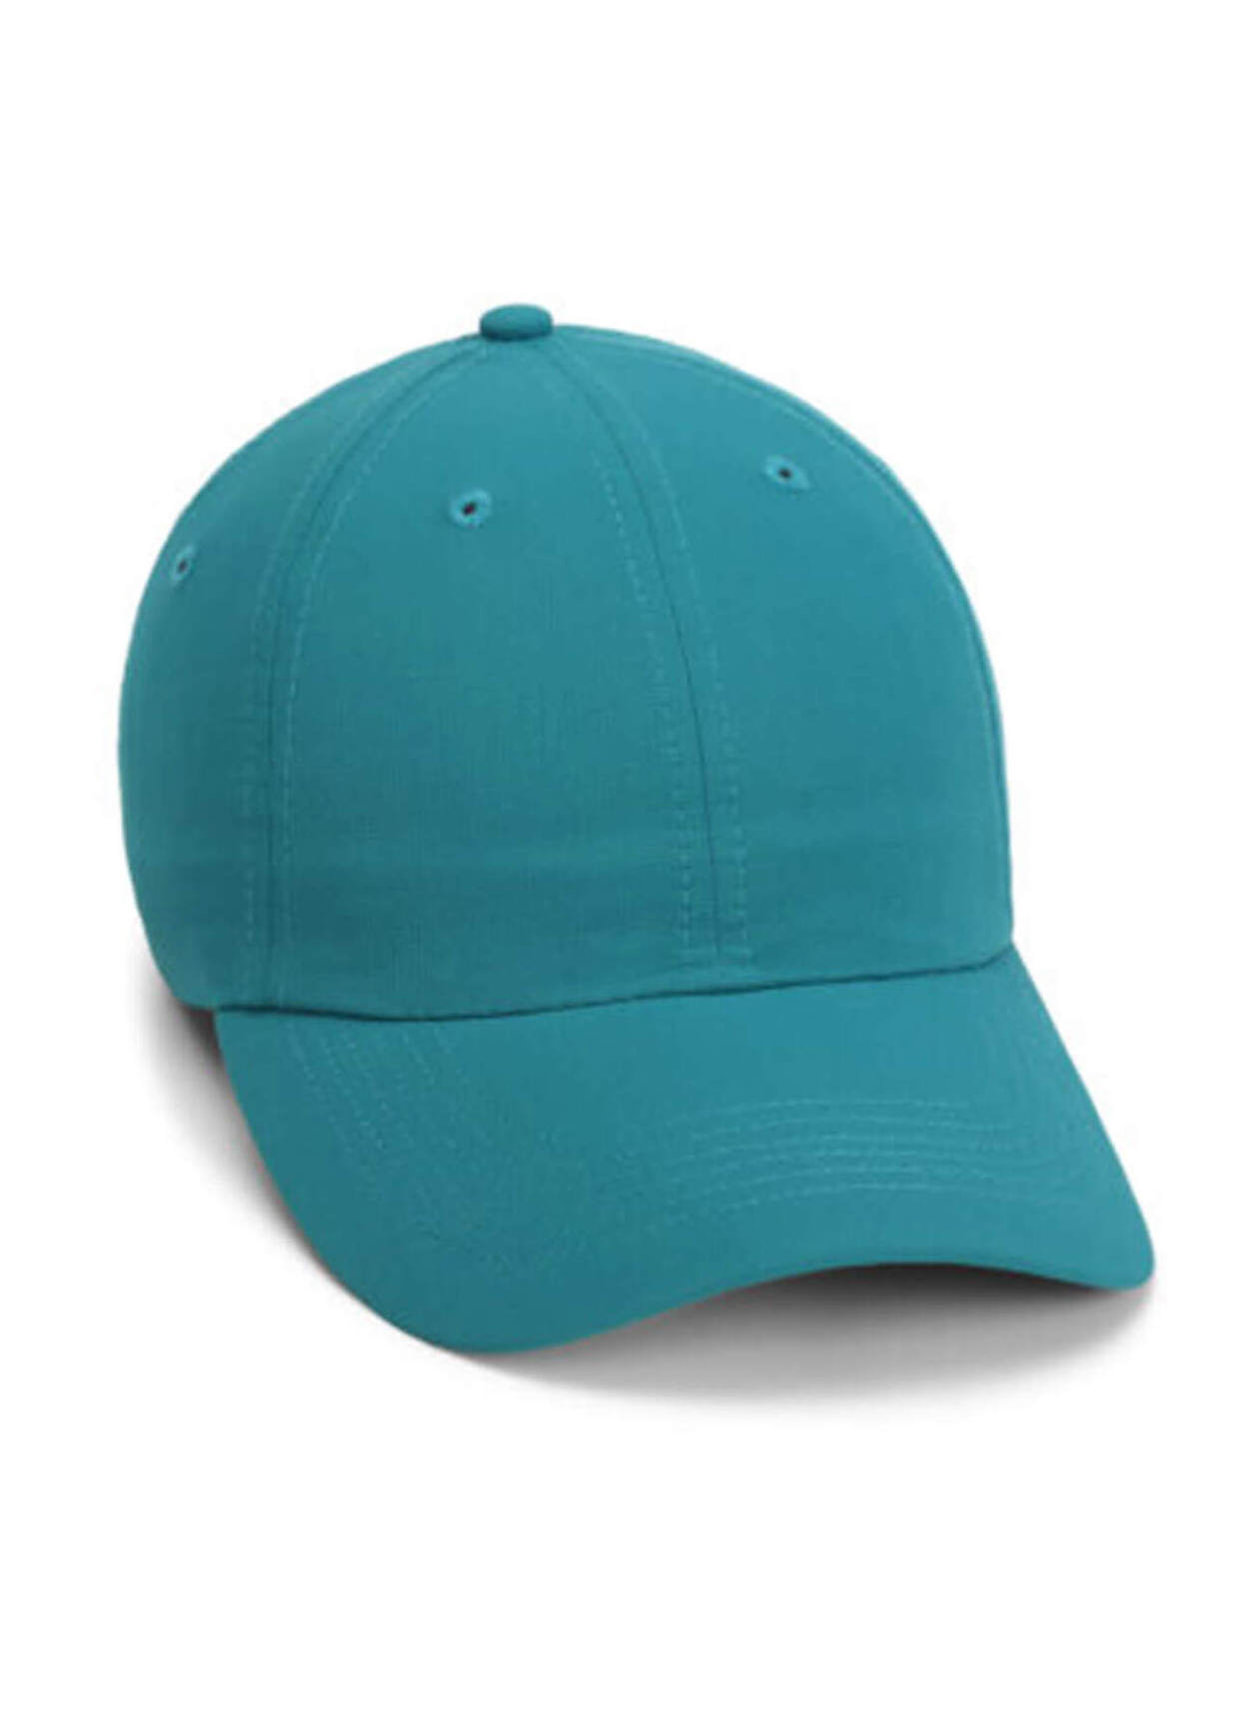 Imperial Cerulean Original Small Fit Performance Hat